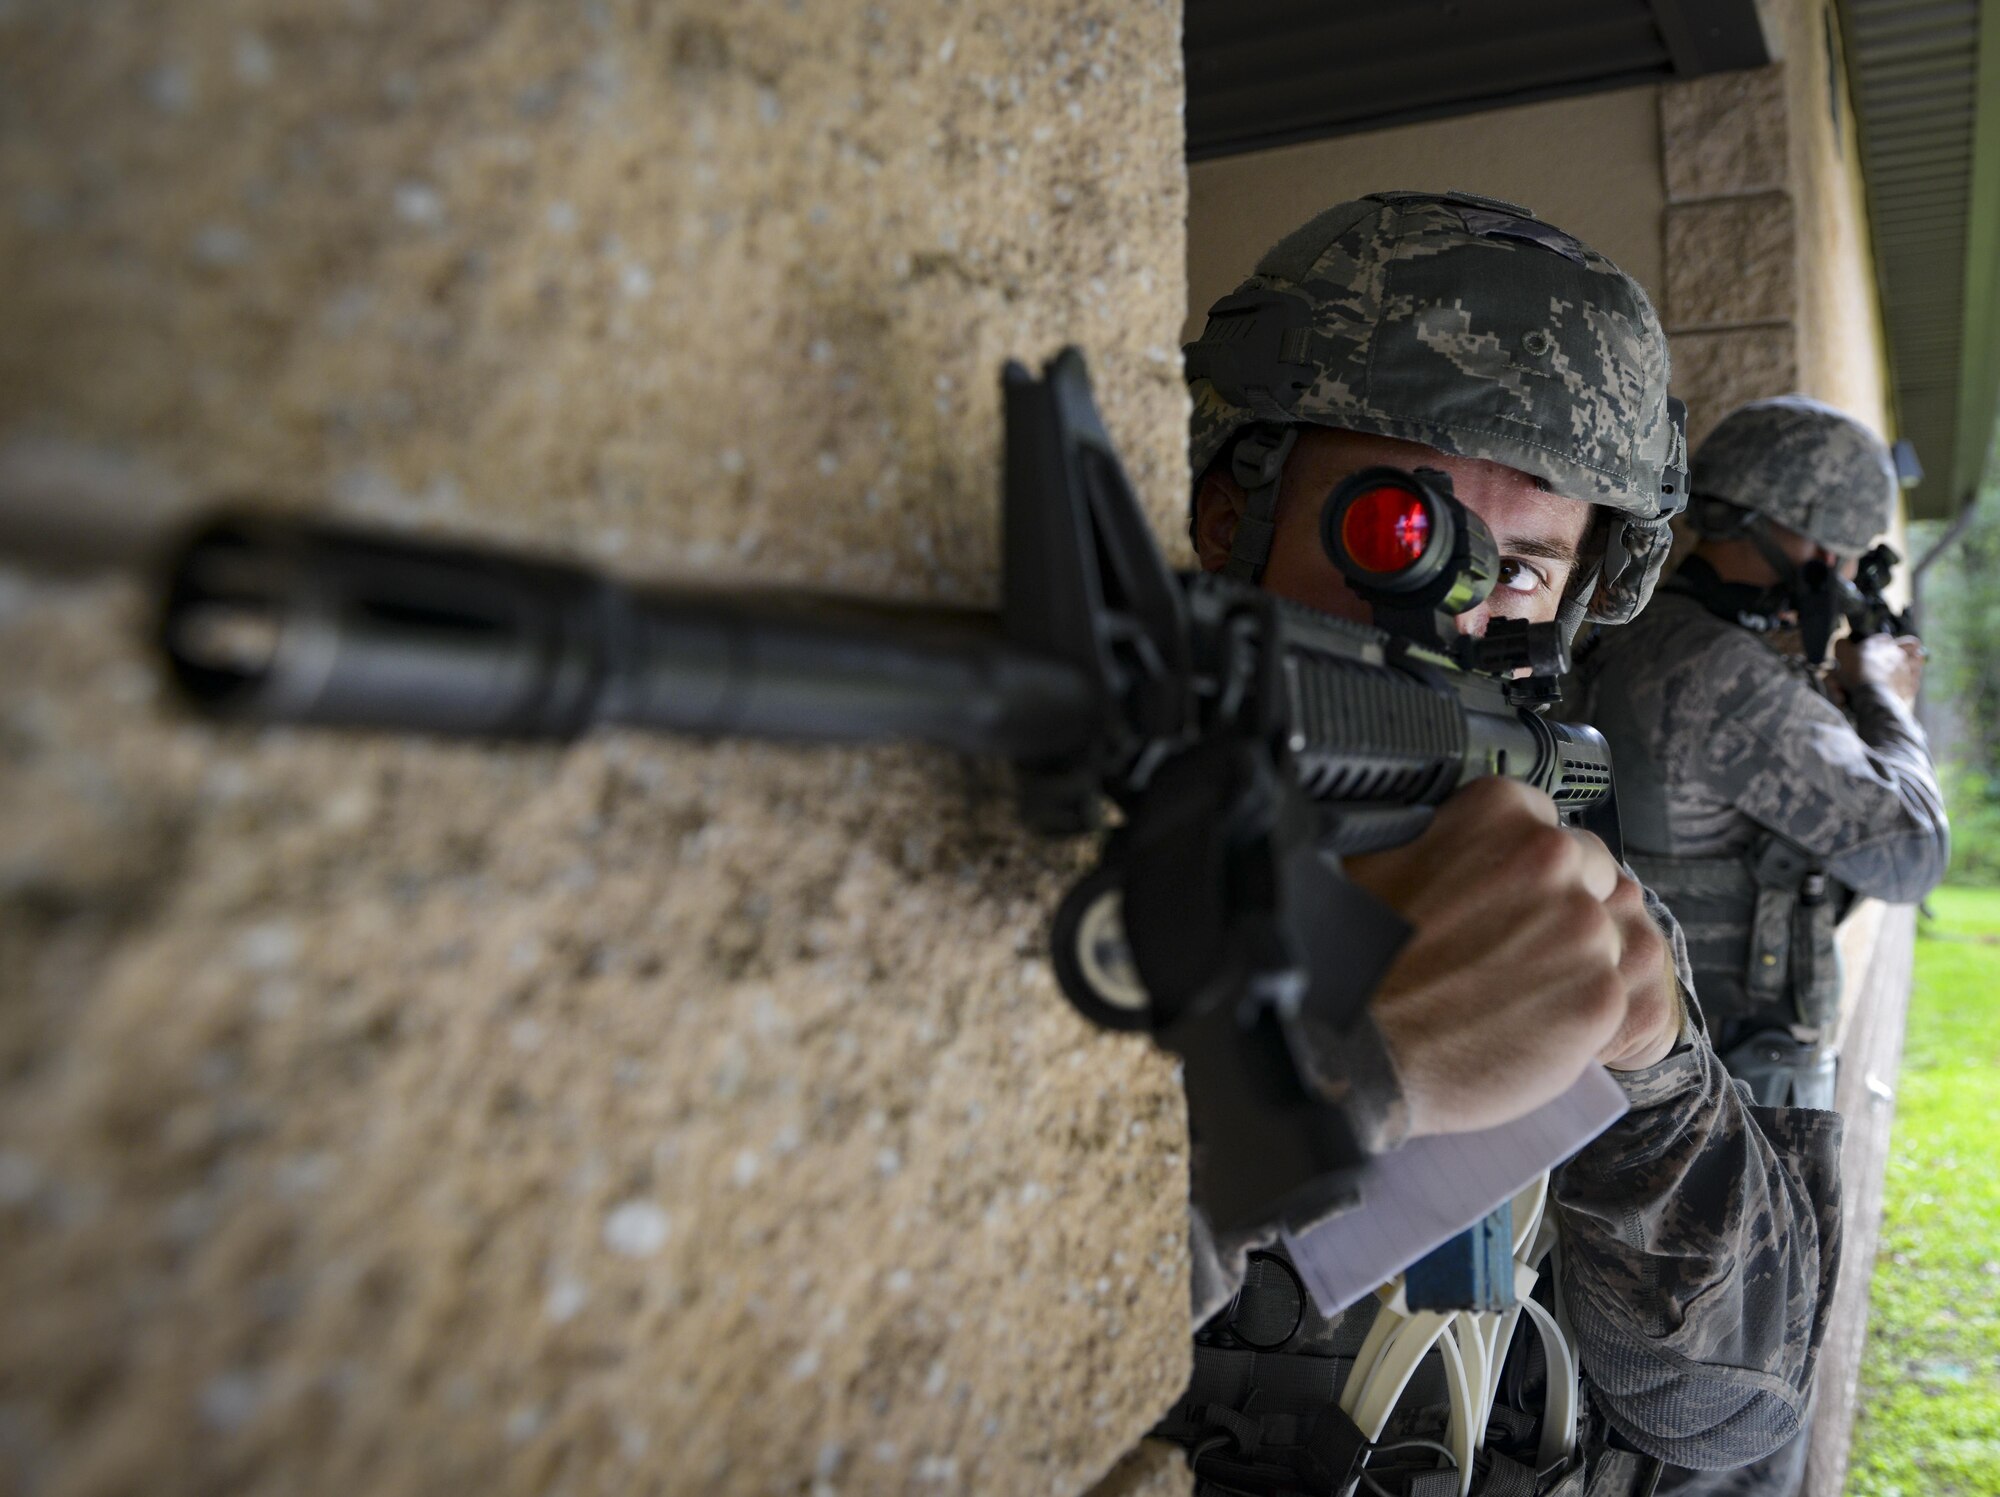 Staff Sgt. Brent Palmer, 23d Security Forces Squadron patrolman, guards an entry control during an emergency response exercise, Aug. 22, 2017, at Moody Air Force Base, Ga. The purpose of this active-shooter exercise was to inspect the recovery phase of an emergency situation while maintaining realism as members still responded as normal. (U.S. Air Force photo by Airman 1st Class Lauren M. Sprunk)